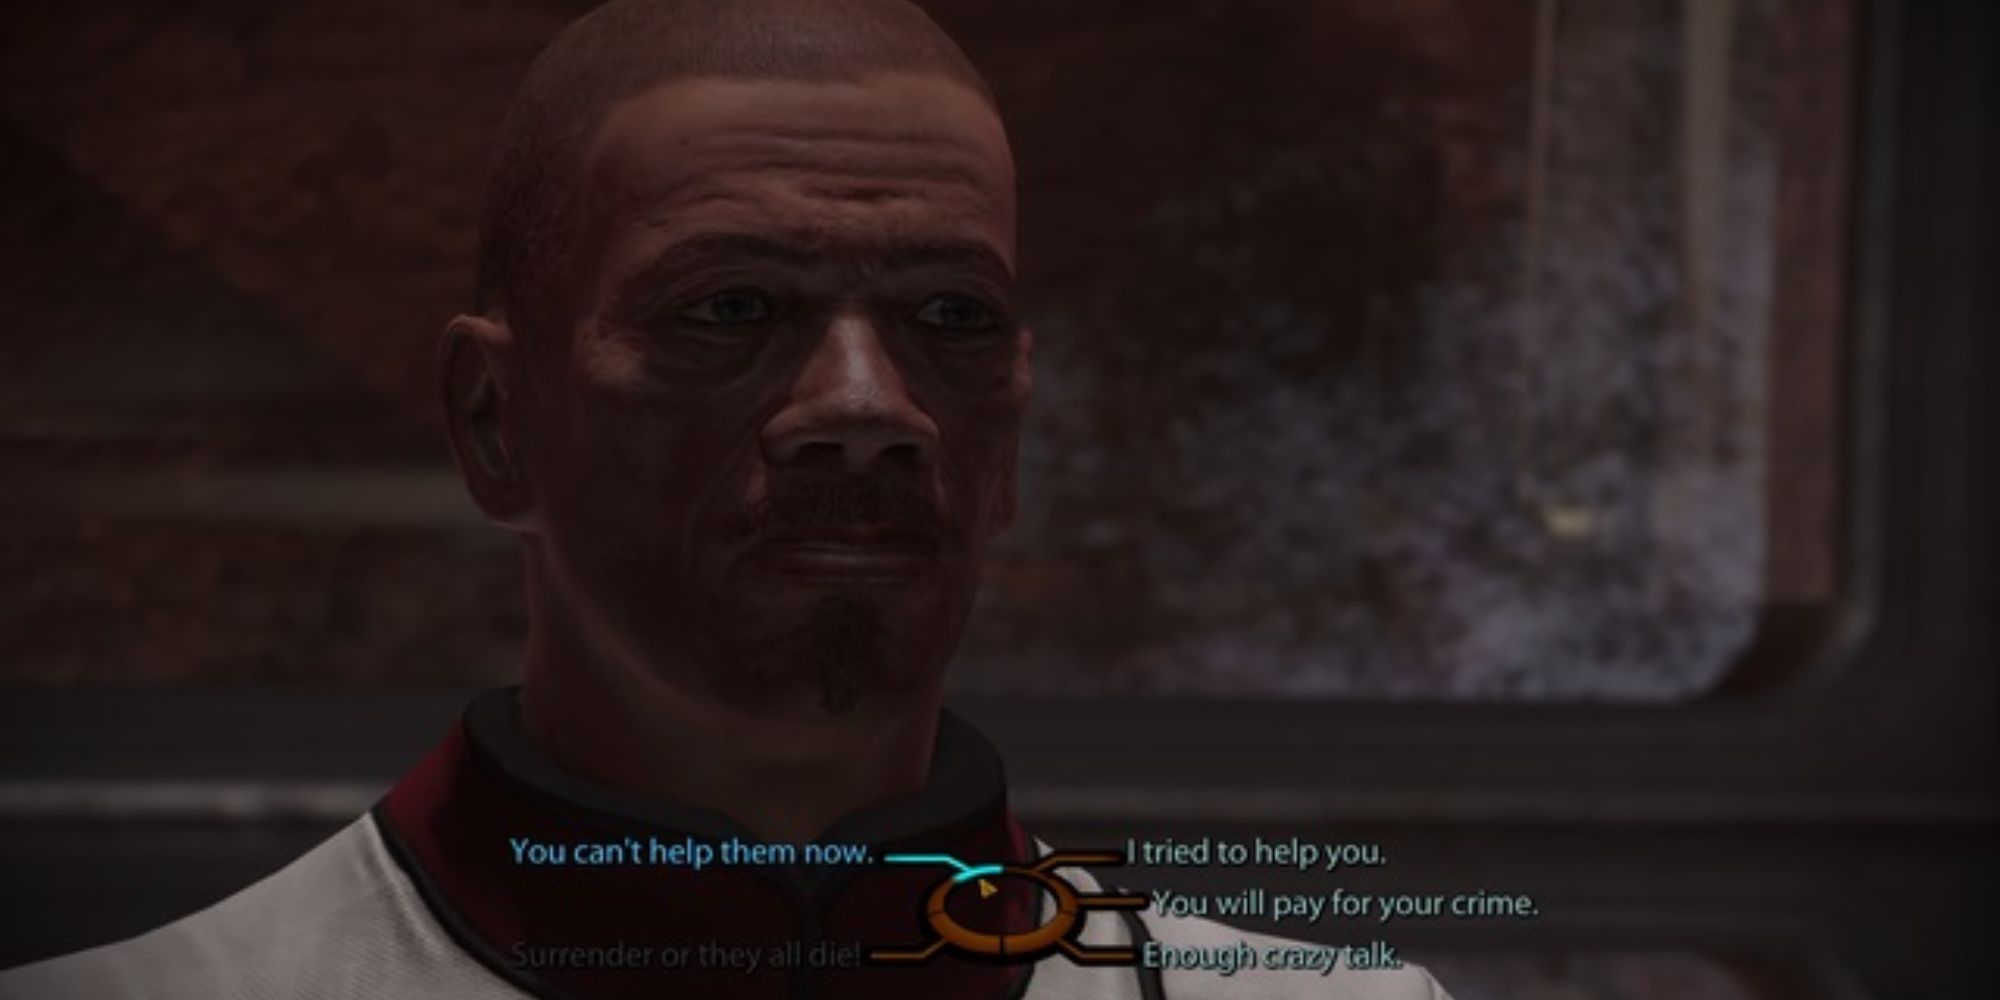 Bioware space RPG Mass Effect Shepard confronts Major Kyle and his cult in-game